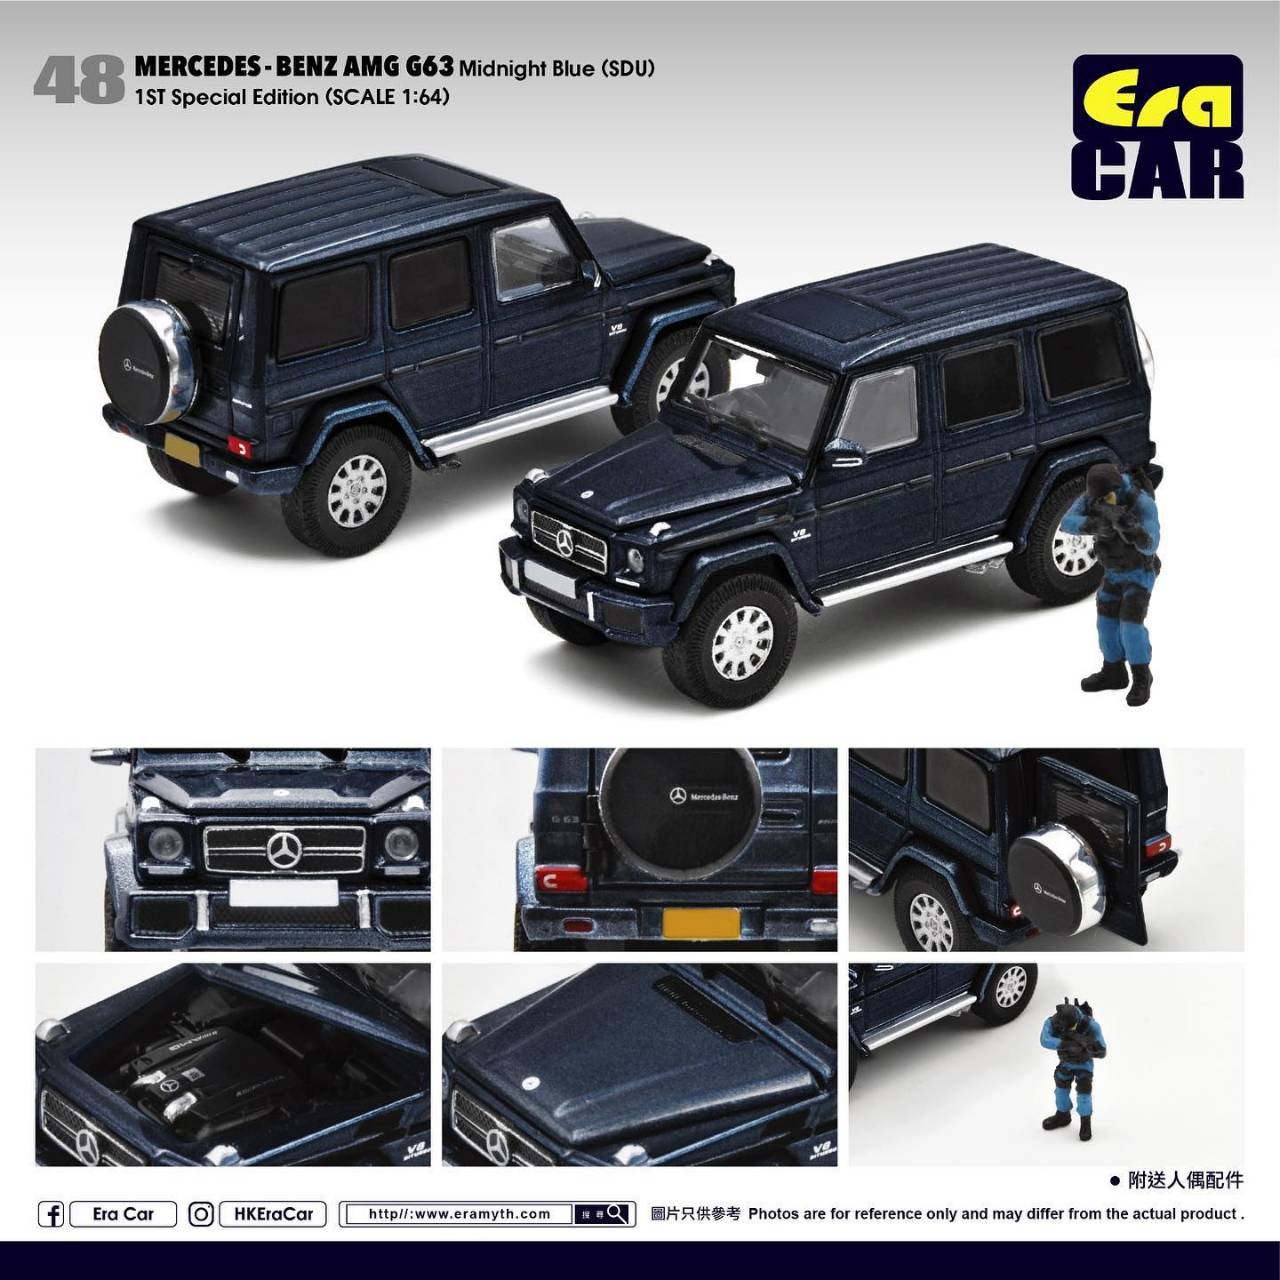 Era Car #48 1st Edition Mercedes-Benz G63 AMG Scale 1:64 Midnight Blue with SWAT